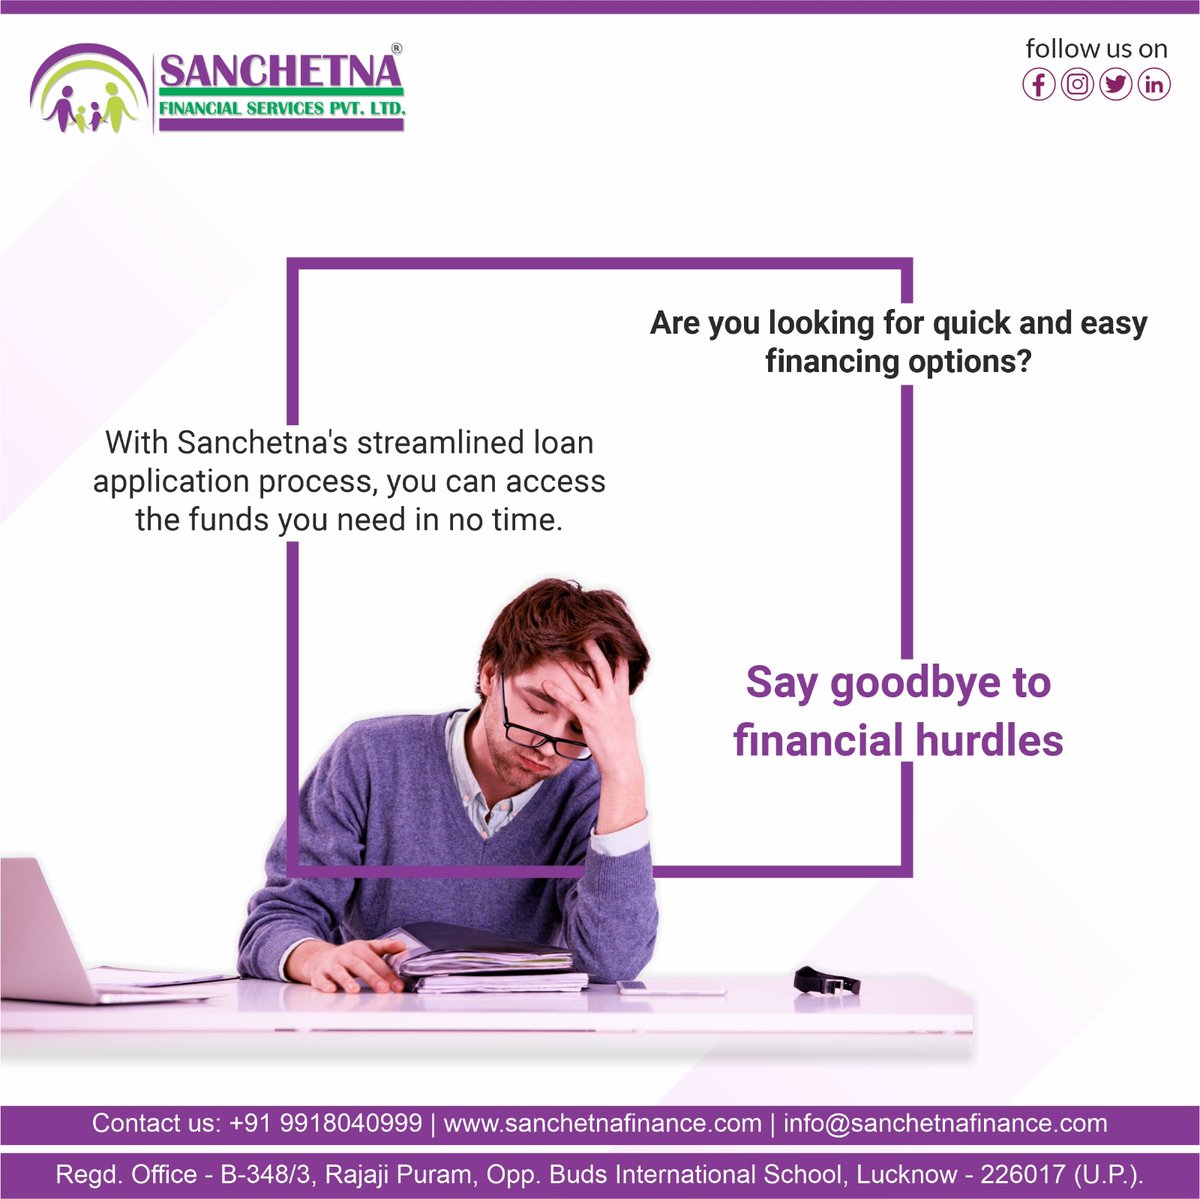 Say Goodbye to Financial Hurdles with Sanchetna's Quick and Easy Financing Options. Access the Funds You Need in No Time

#LucknowFinance #UPLoans #sanchetnafinance
#FinancialServices #LoanSolutions
#QuickFinancing #EasyLoans
#FinancialFreedom #FundsAccess
#FinanceMadeEasy